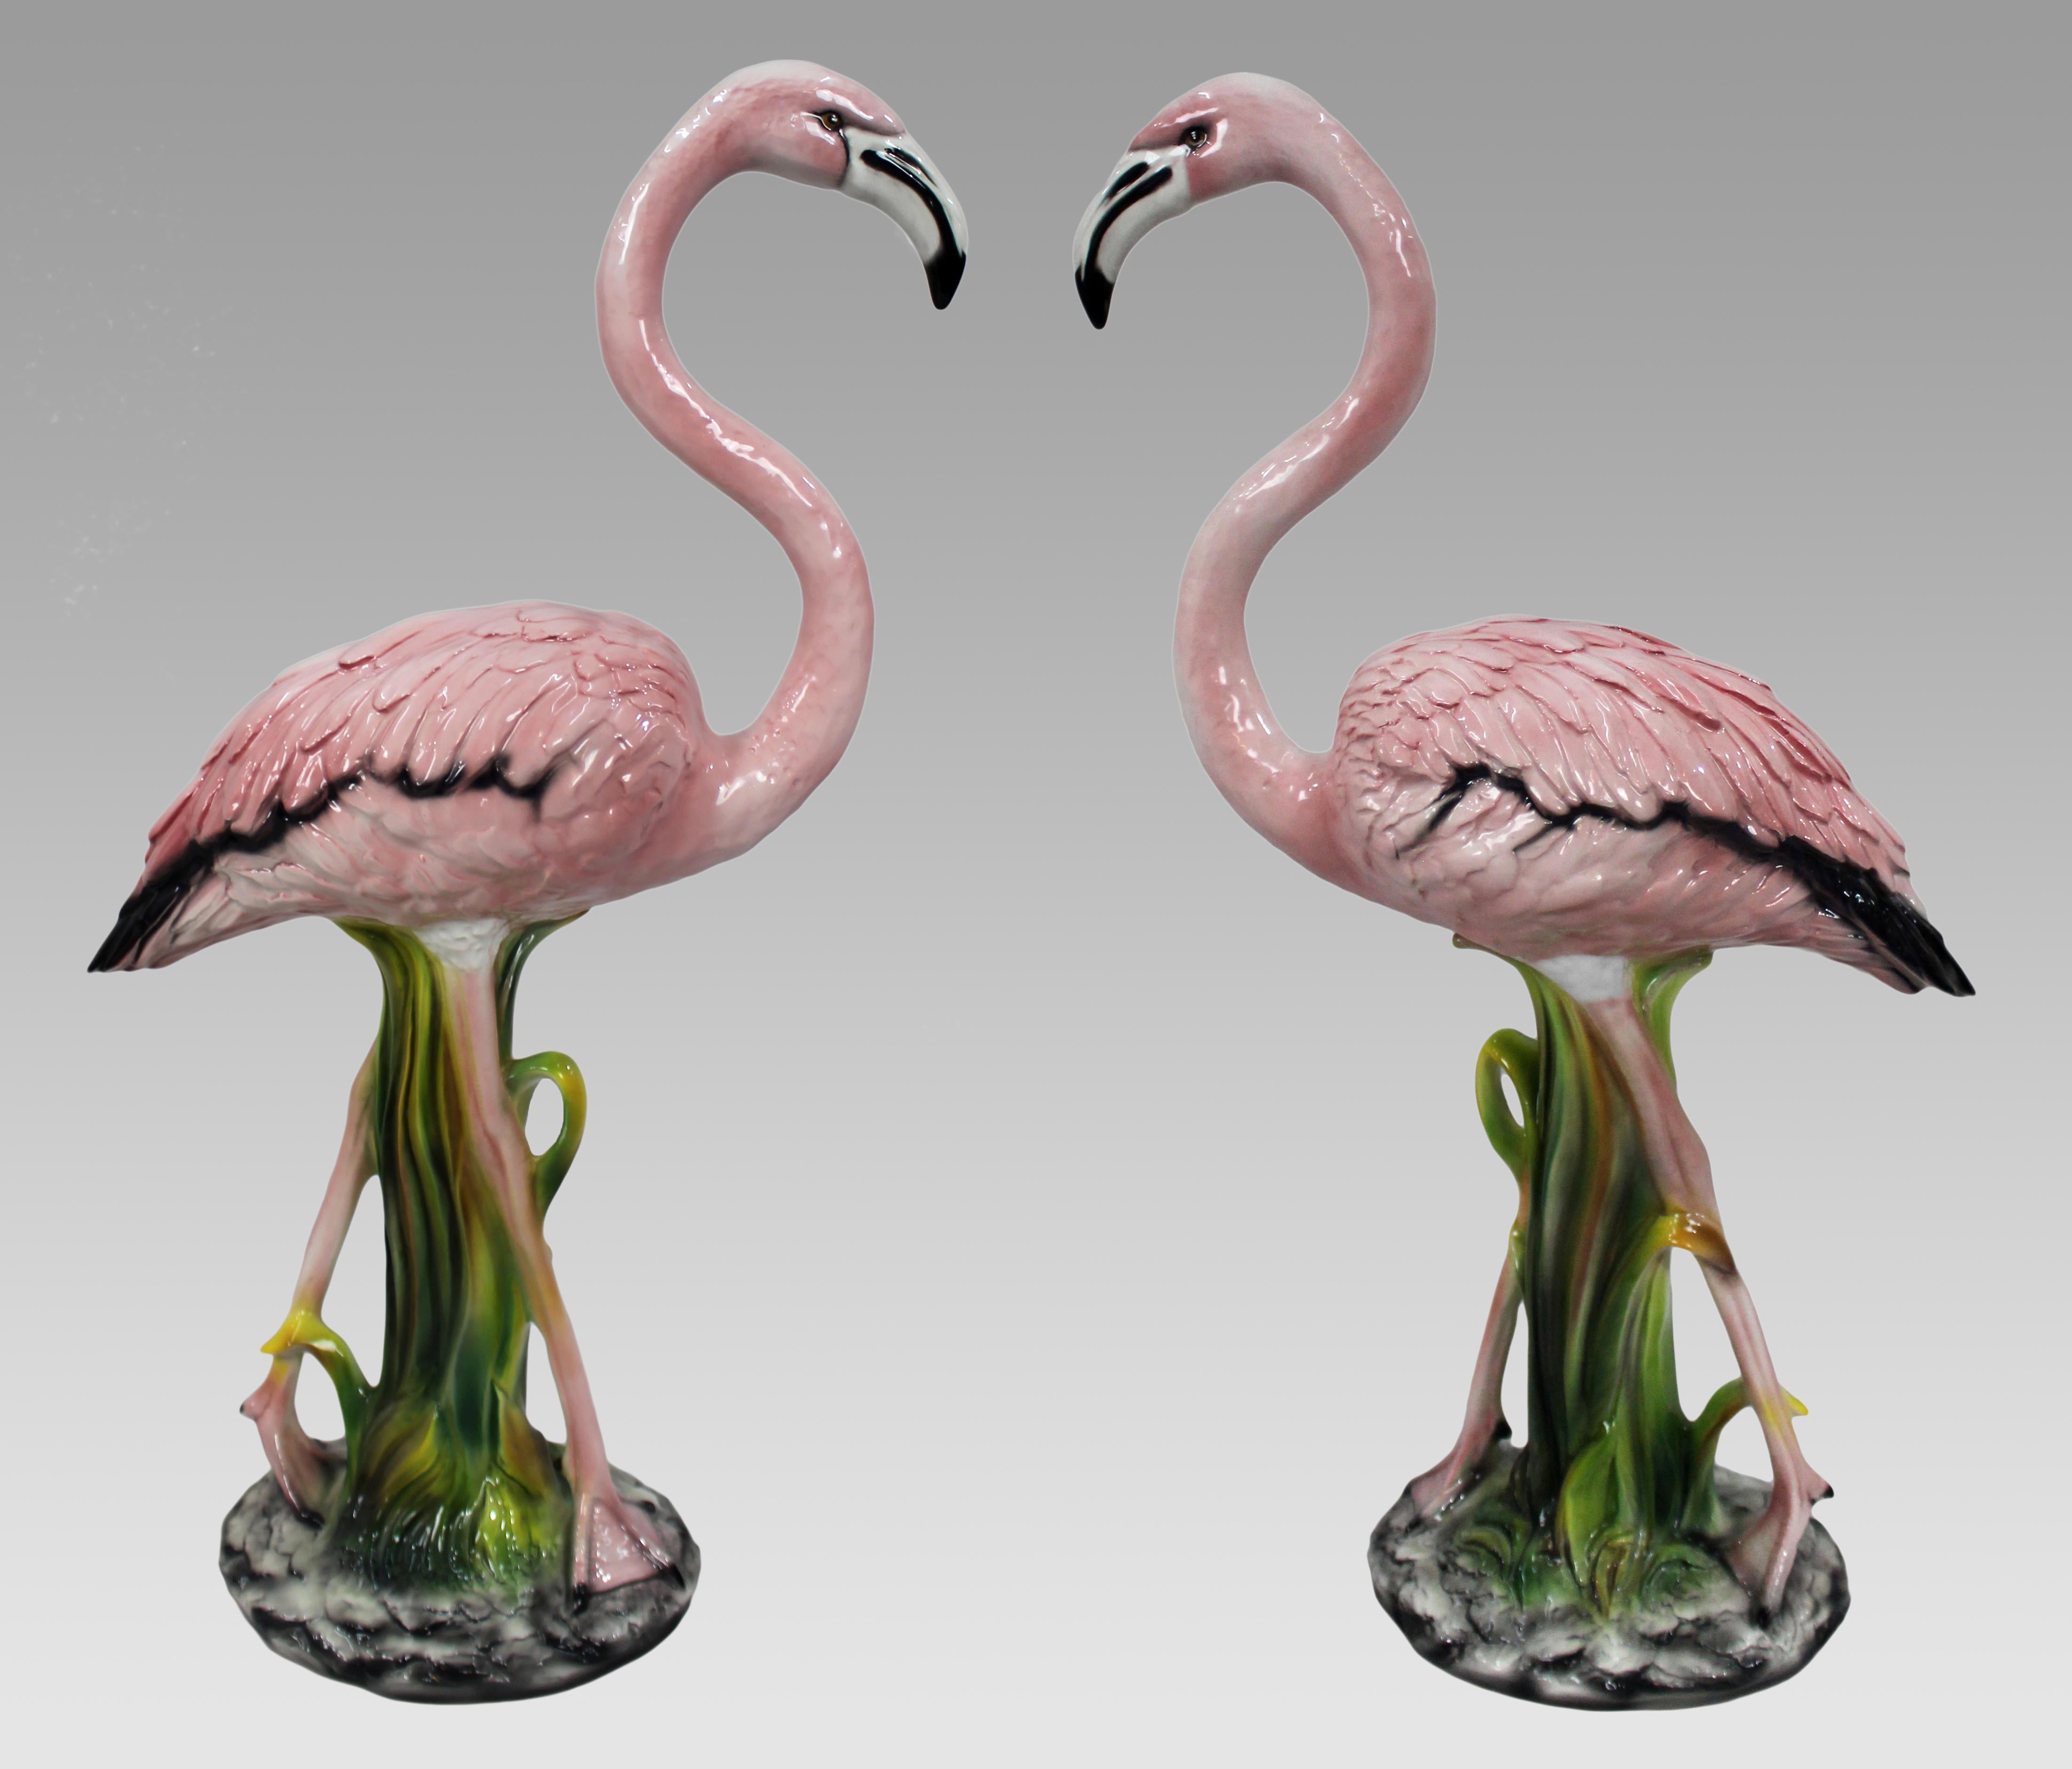 Details about   Flamingo a double flamingo vase old ceramic  5" tall c1986 